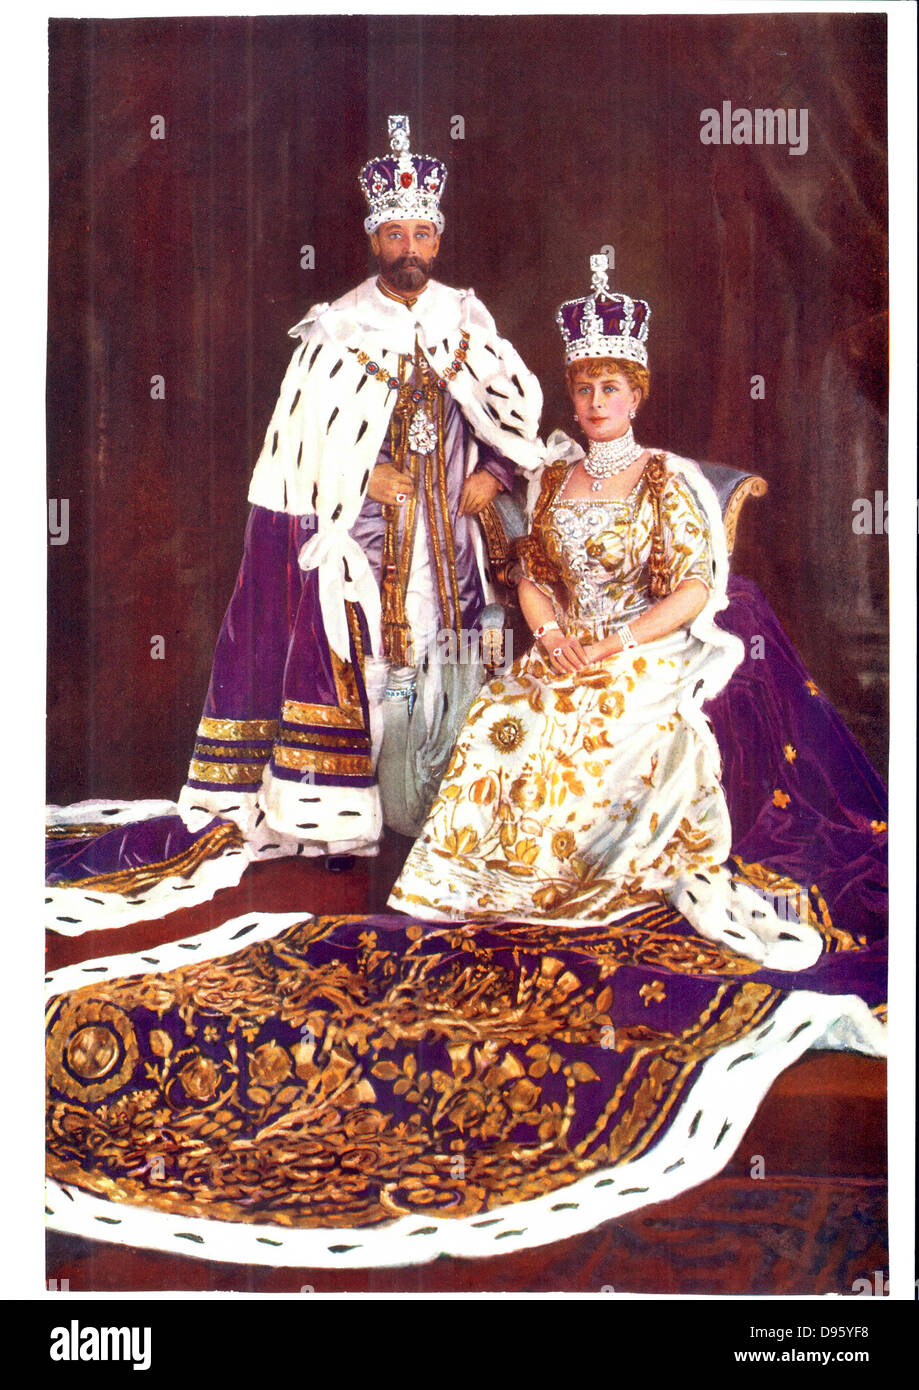 File:Great Britain's King and Queen (1913).jpg - Wikimedia Commons